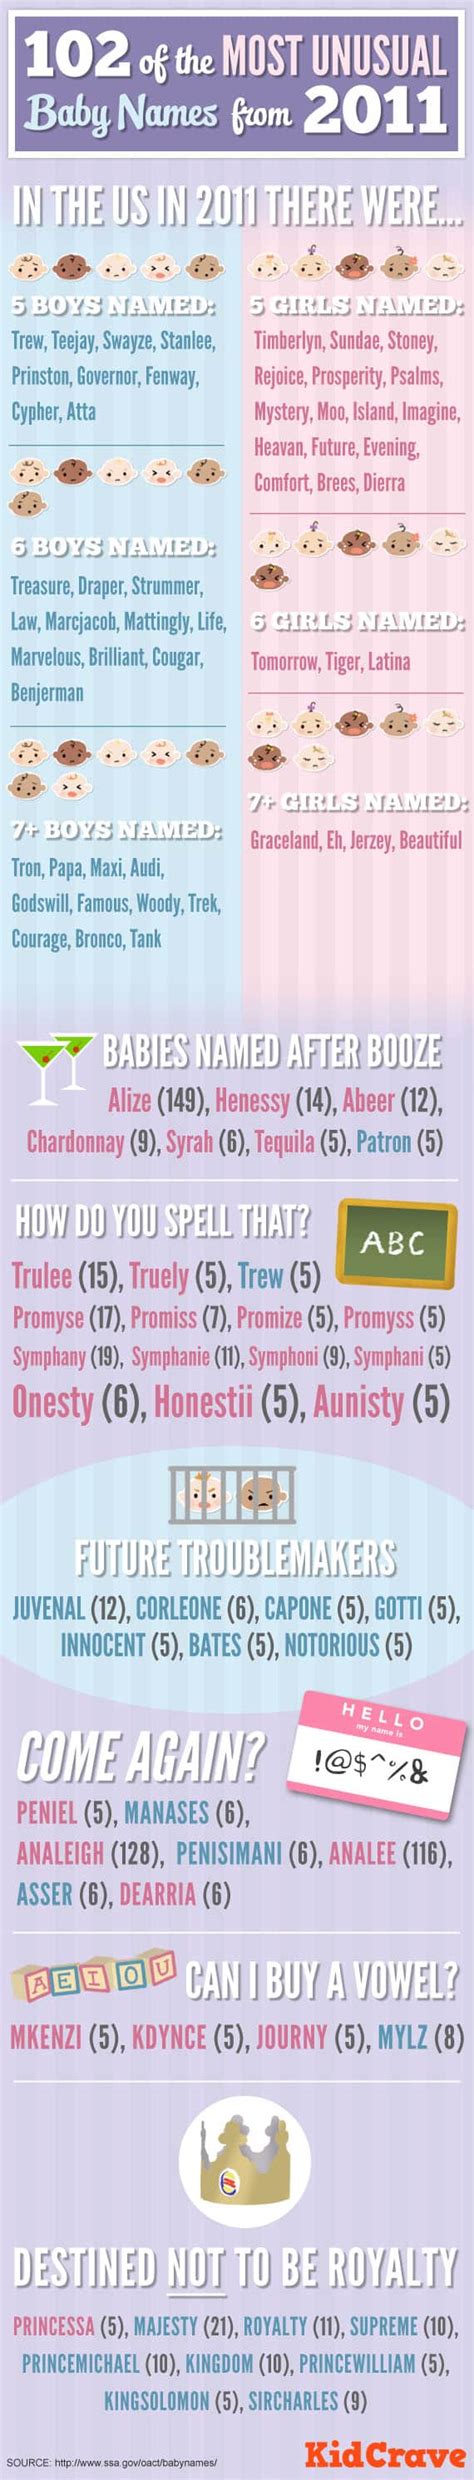 102 Of The Most Unusual Baby Names Of 2011 Infographic Kid Crave